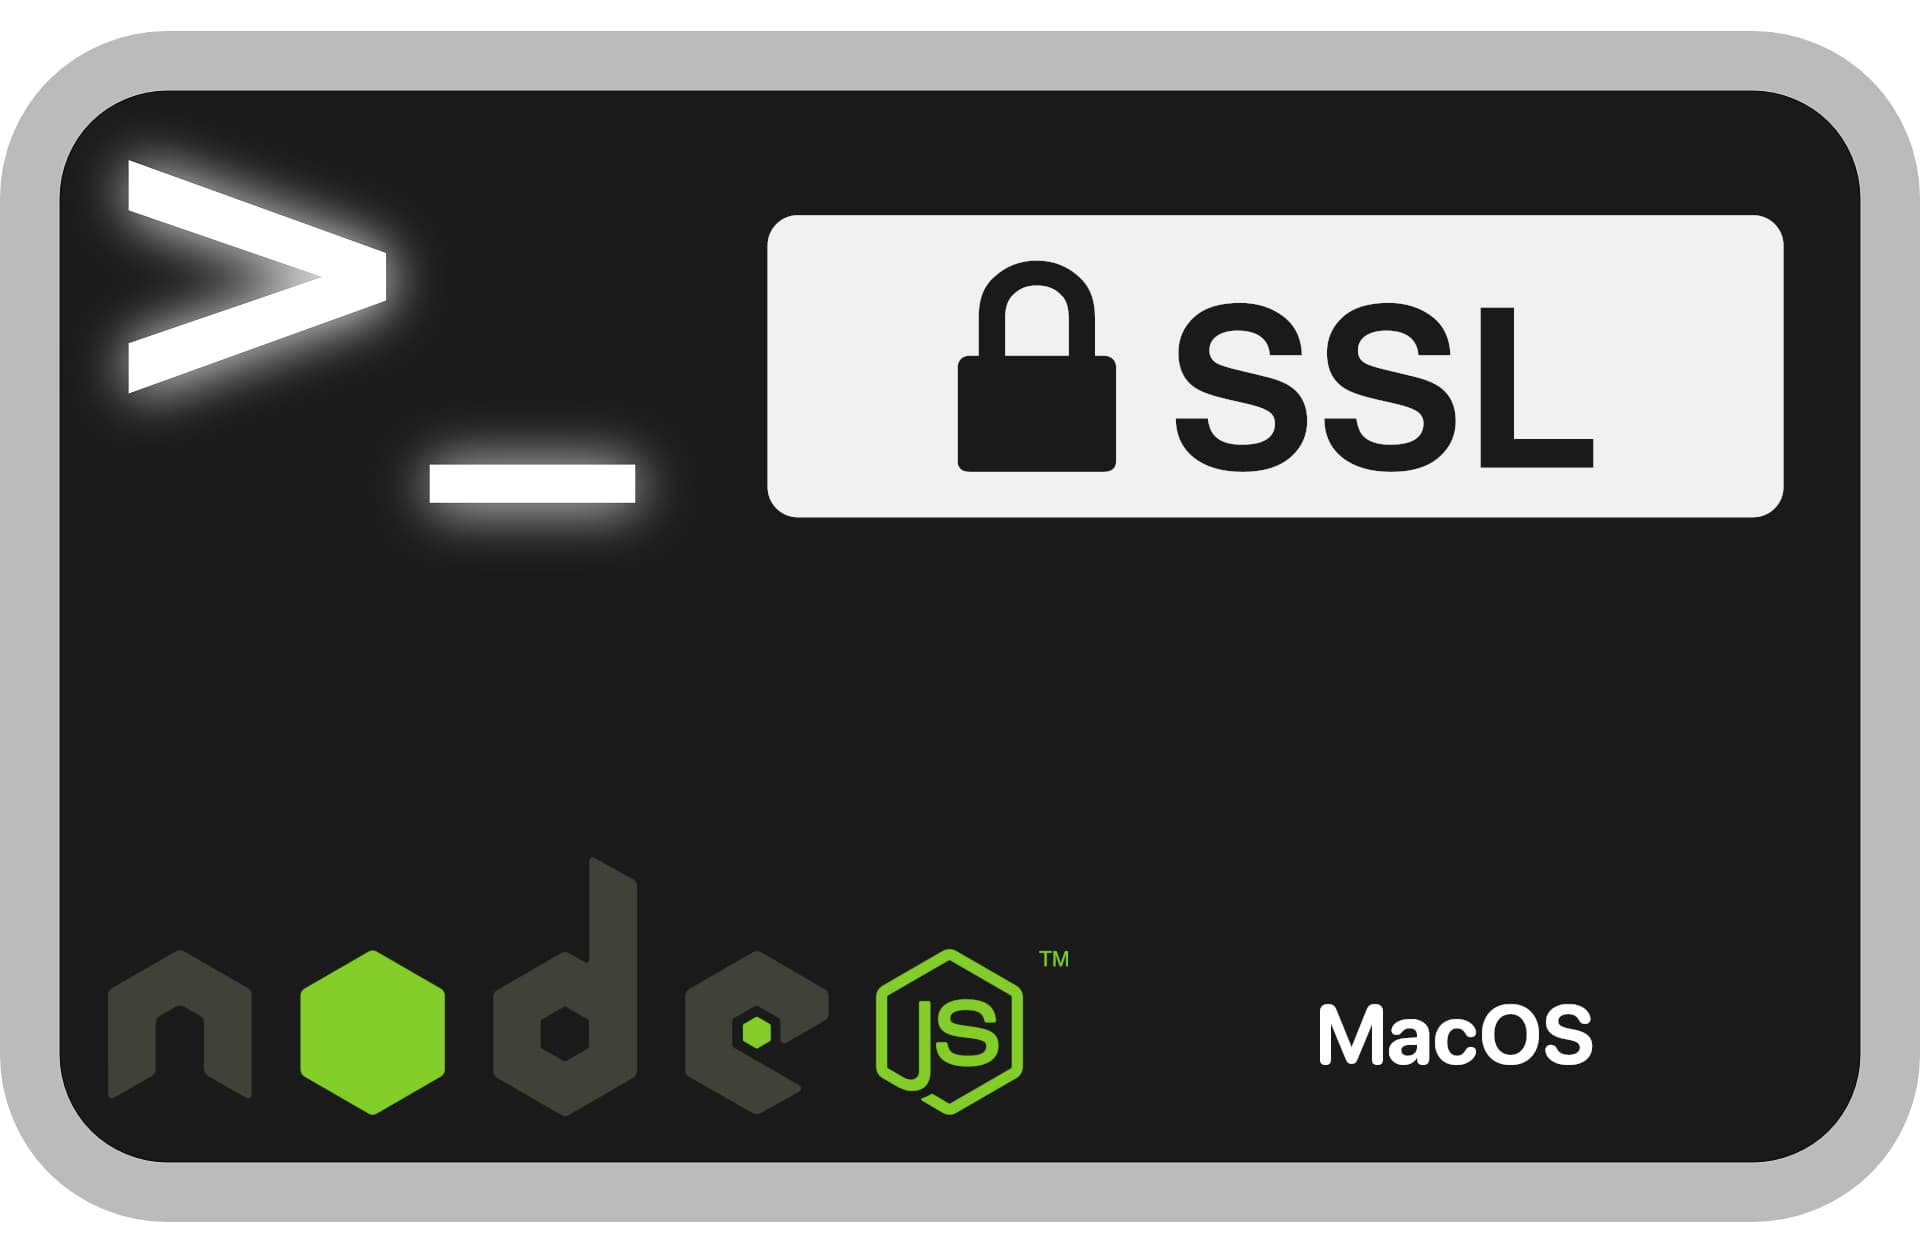 MacOS terminal with lock icon and SSL text next to it, Node.JS logo and MacOS text